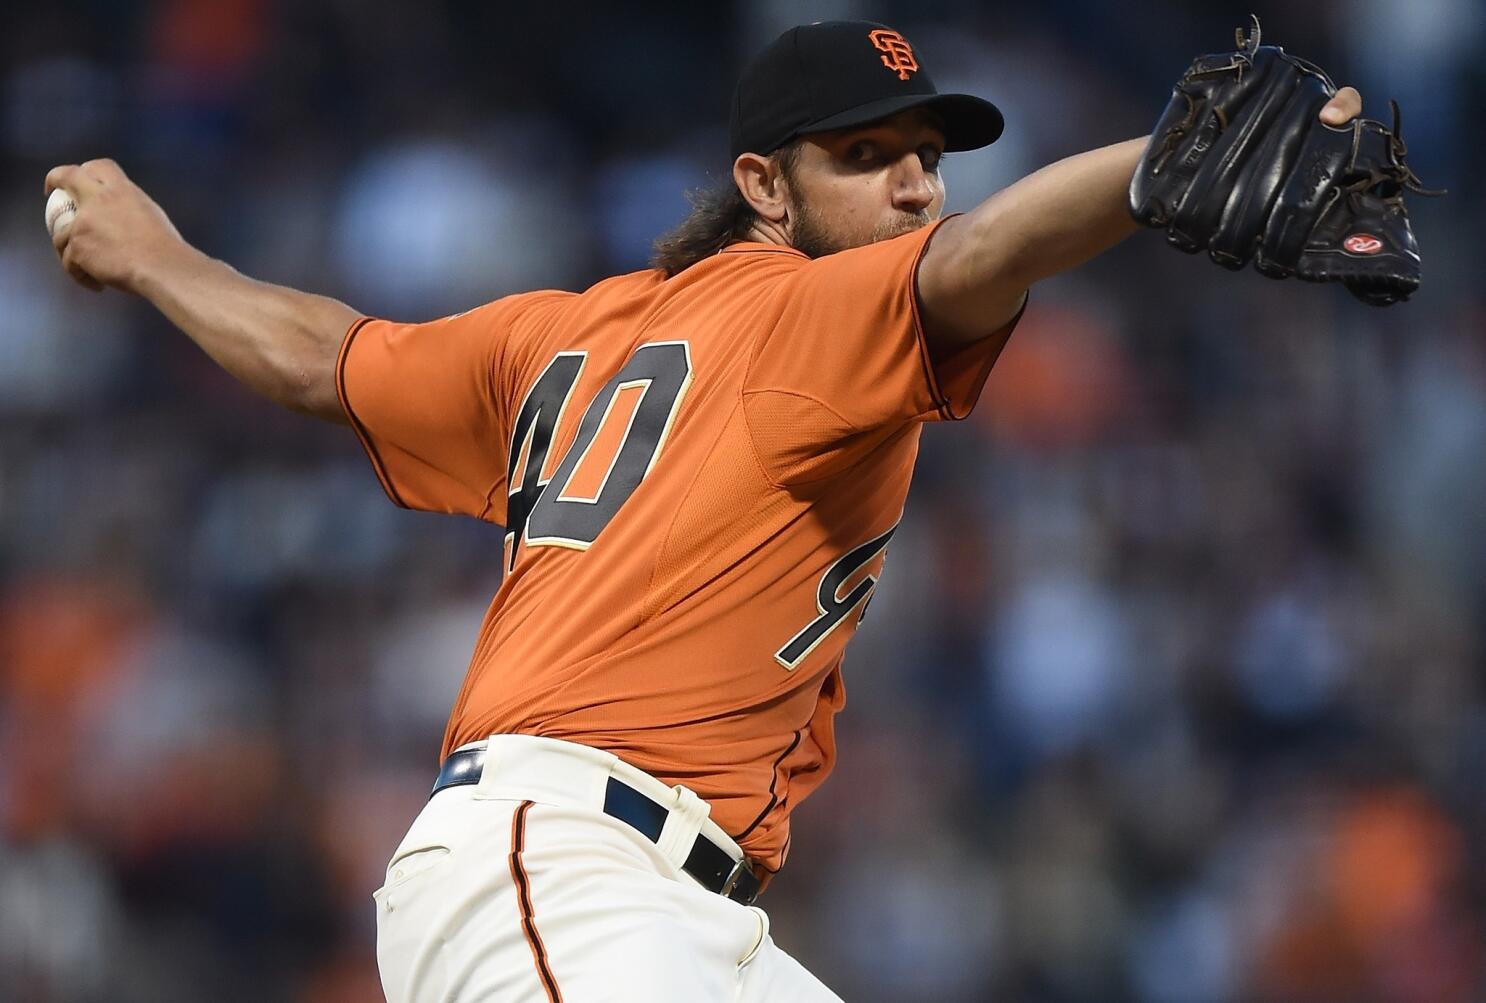 World Series 2014: Madison Bumgarner Rises to the Moment, and